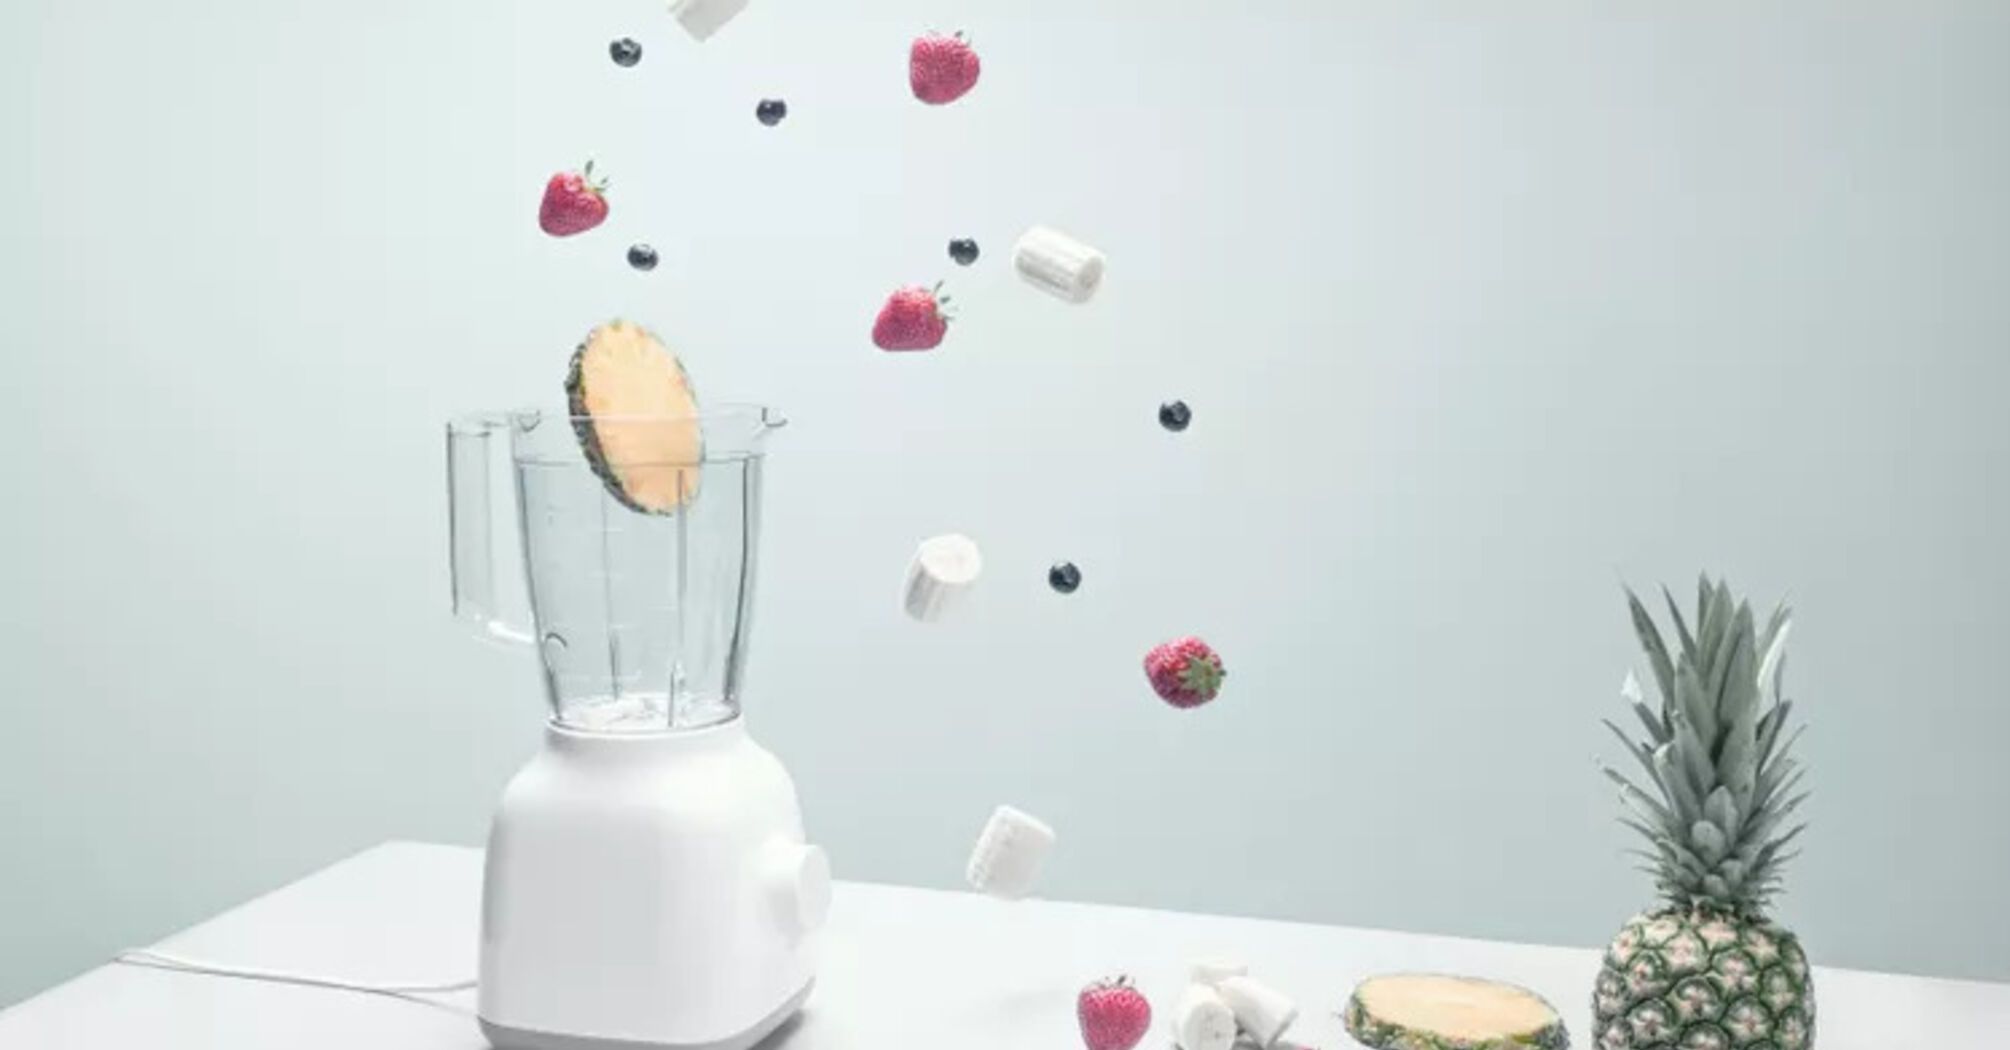 6 foods that can damage your blender